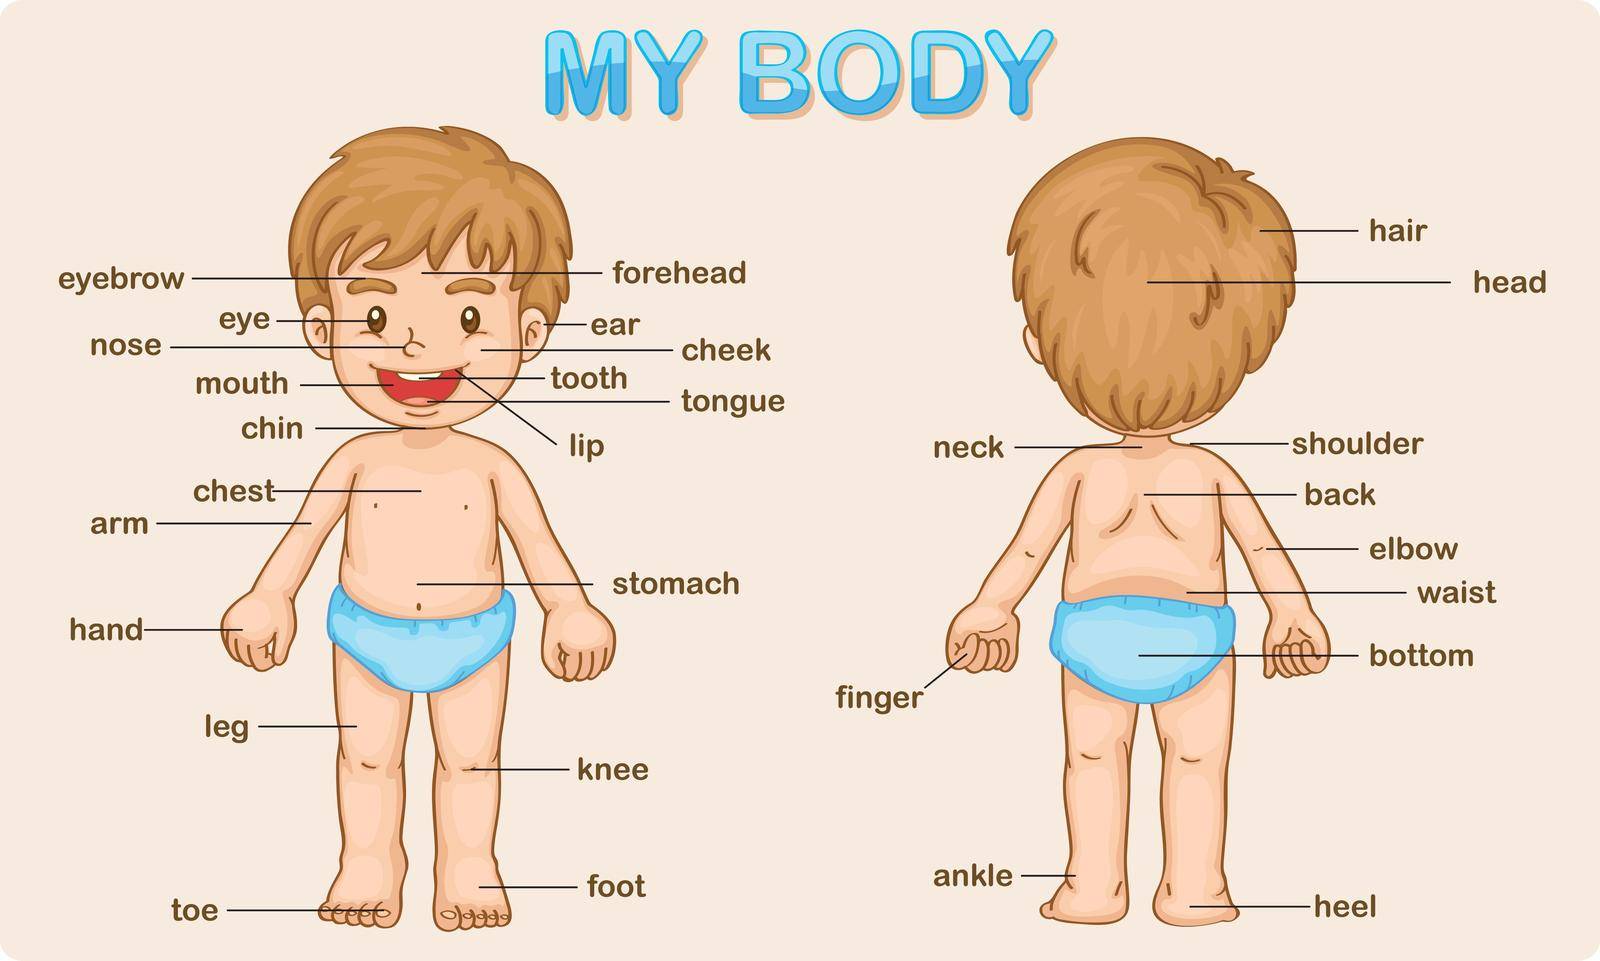 Illustration poster of the parts of the body